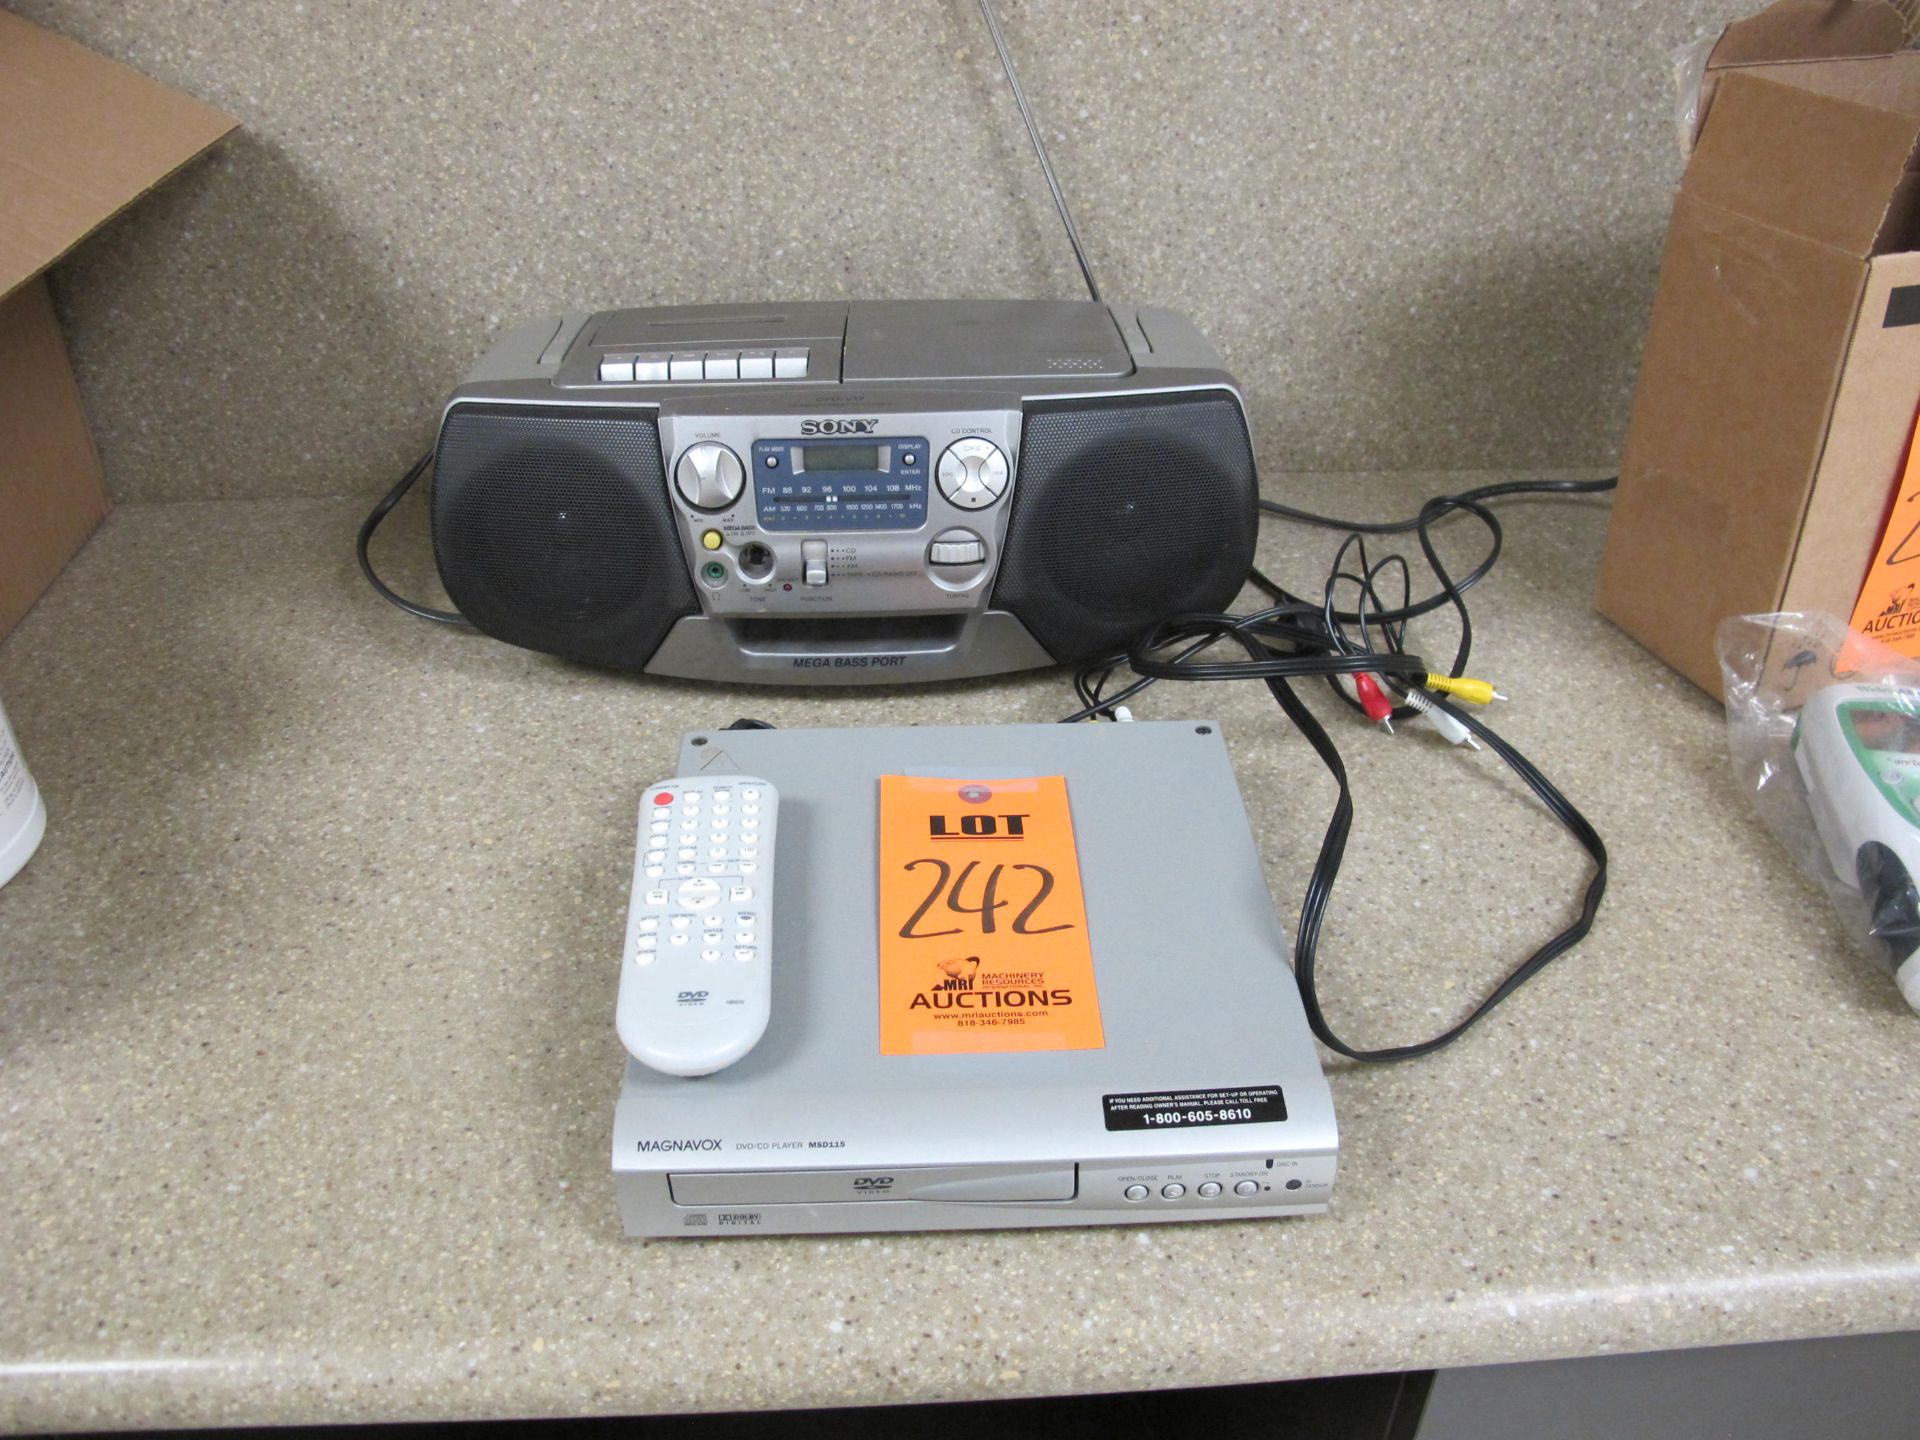 Lot containing Magnavox DVD Player with Remote & Sony Portable AM/FM DVD Cassette Player